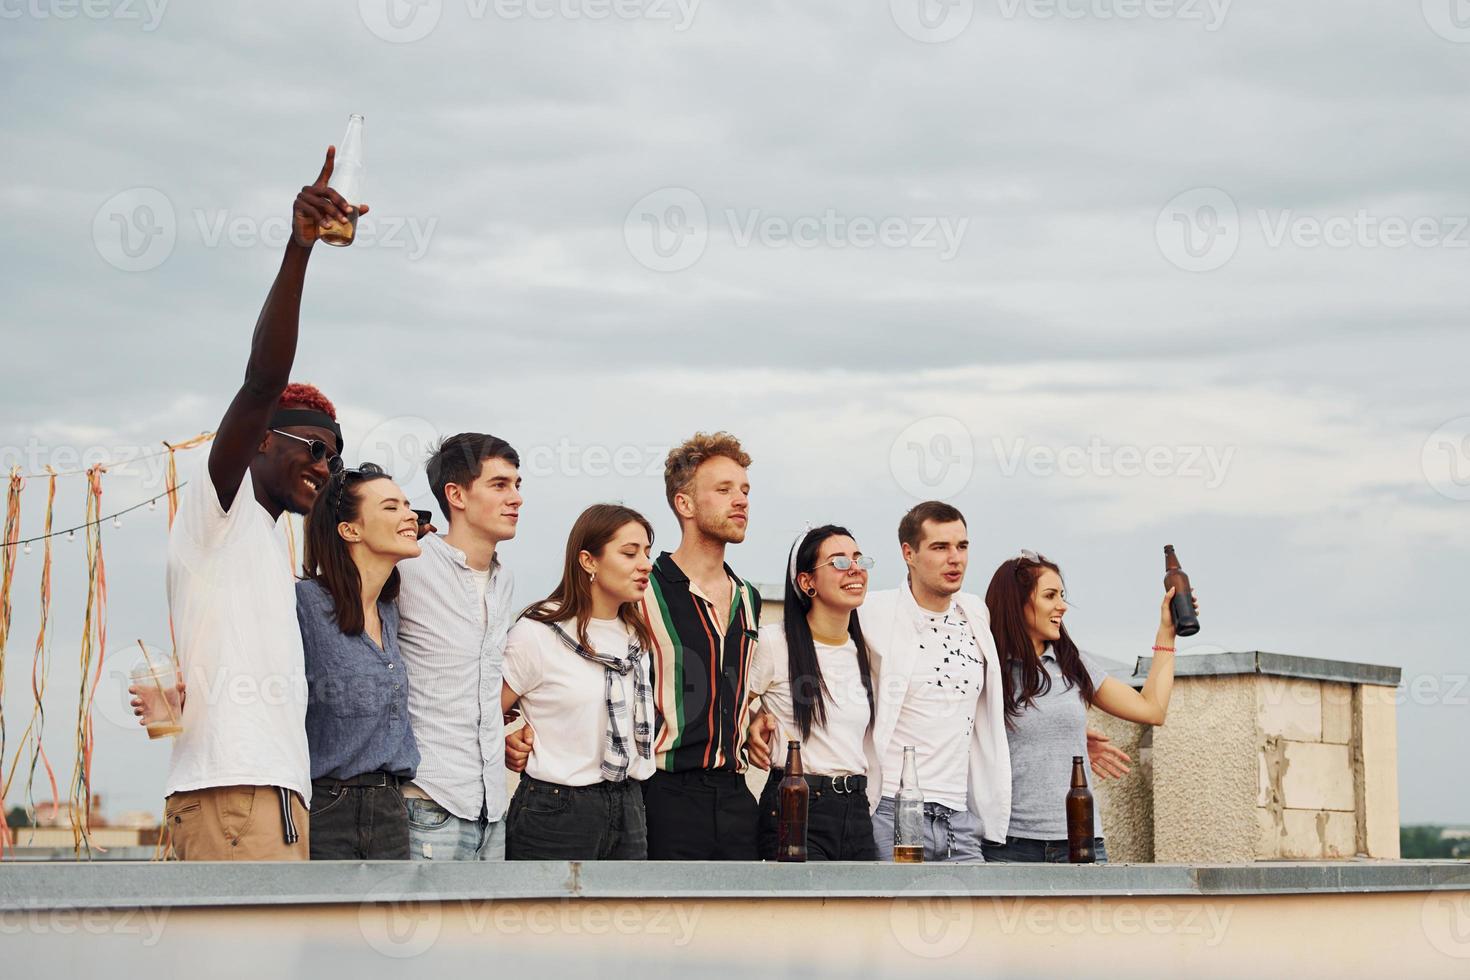 Decorated place. Cloudy weather. Group of young people in casual clothes have a party at rooftop together at daytime photo